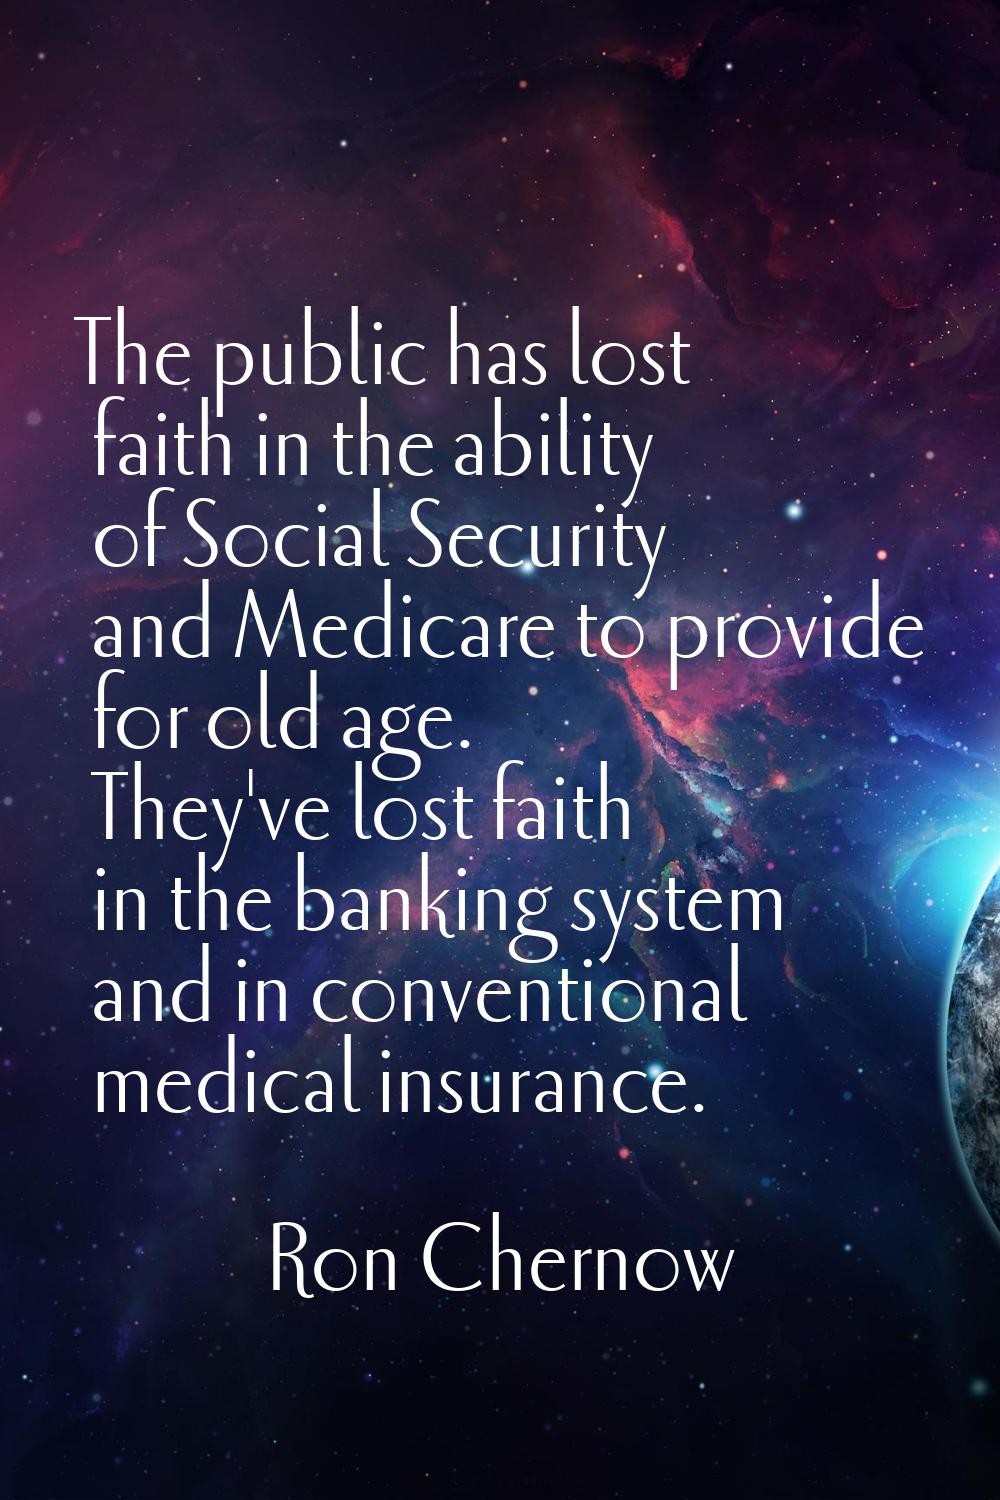 The public has lost faith in the ability of Social Security and Medicare to provide for old age. Th